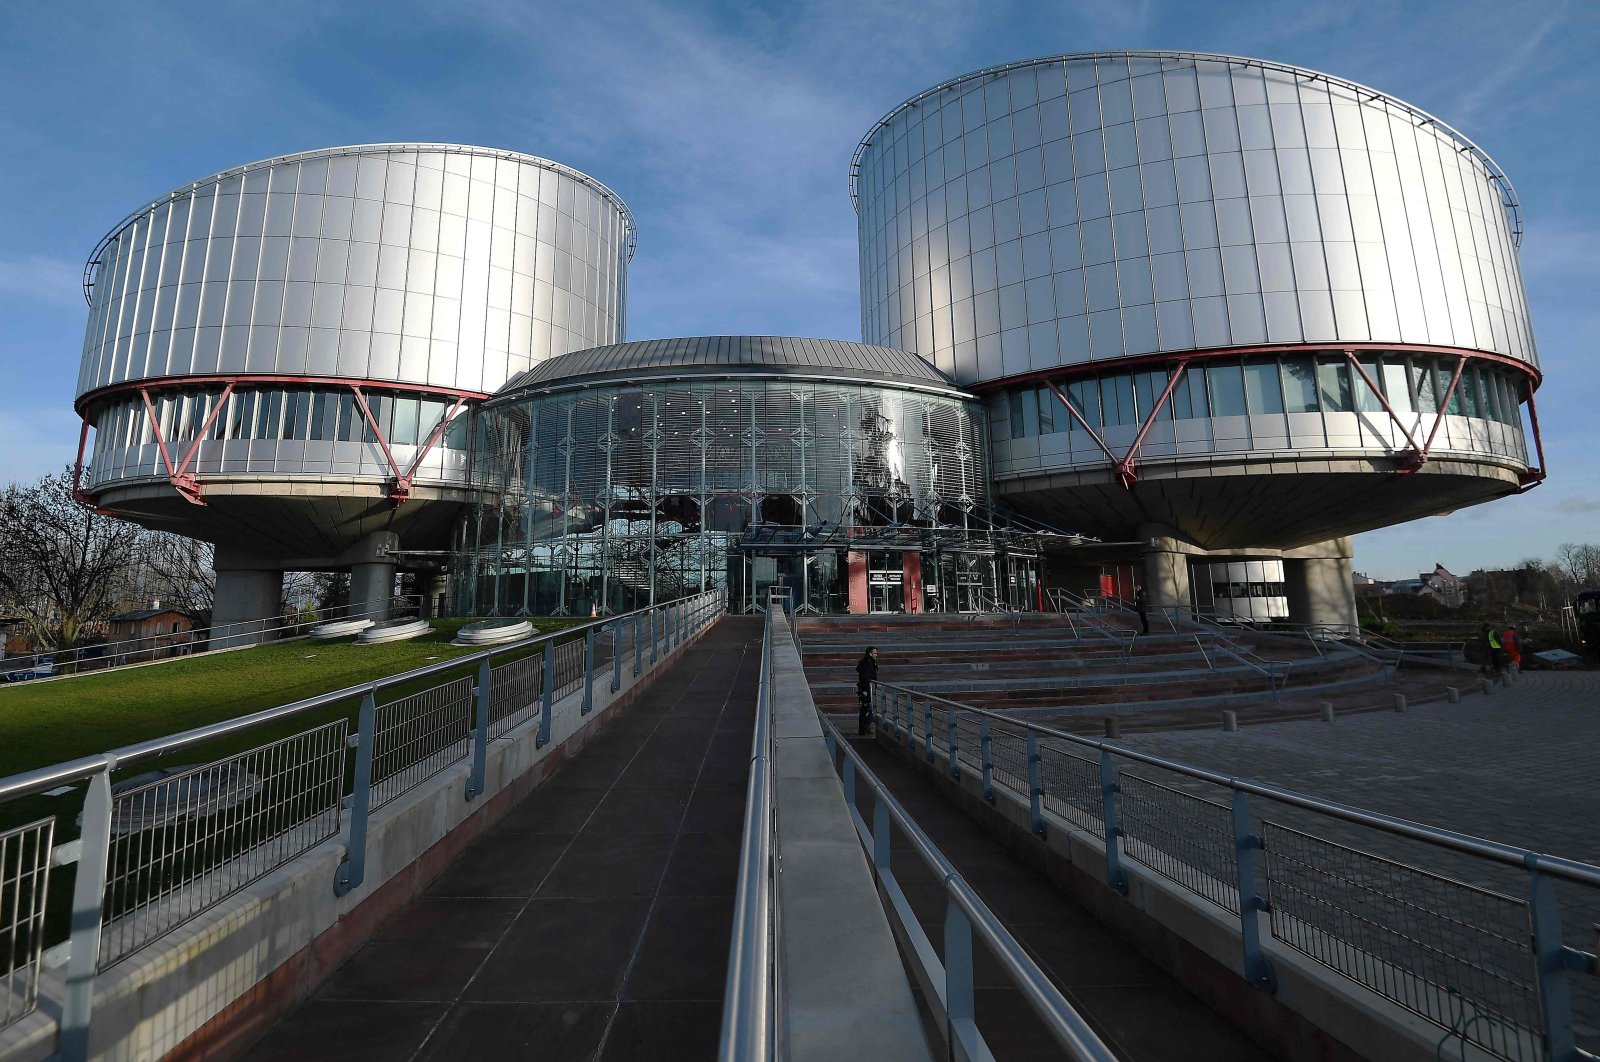 The European Court of Human Rights (ECtHR) is pictured in Strasbourg, eastern France, Jan. 24, 2018. (AFP File Photo)